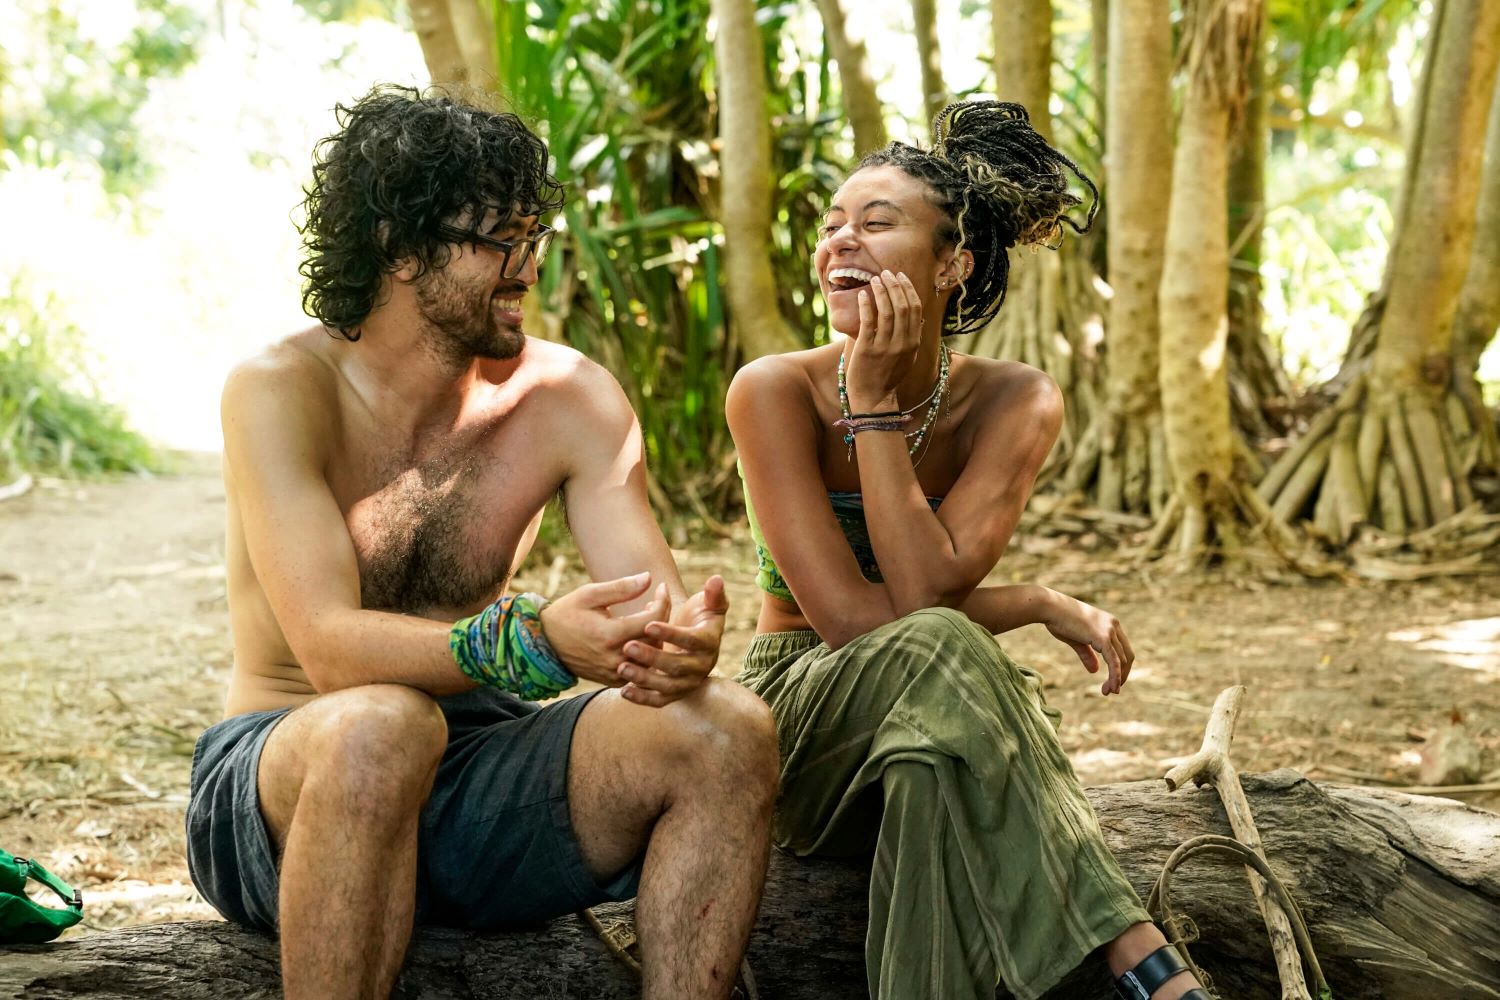 Matt Blankinship and Claire Rafson sit on a log at the Soka camp in 'Survivor 44' Episode 3, 'Sneaky Little Snake.' Matt wears dark gray shorts and his green 'Survivor' buff around his wrist. Claire wears her green 'Survivor' buff as a shirt and green pants.